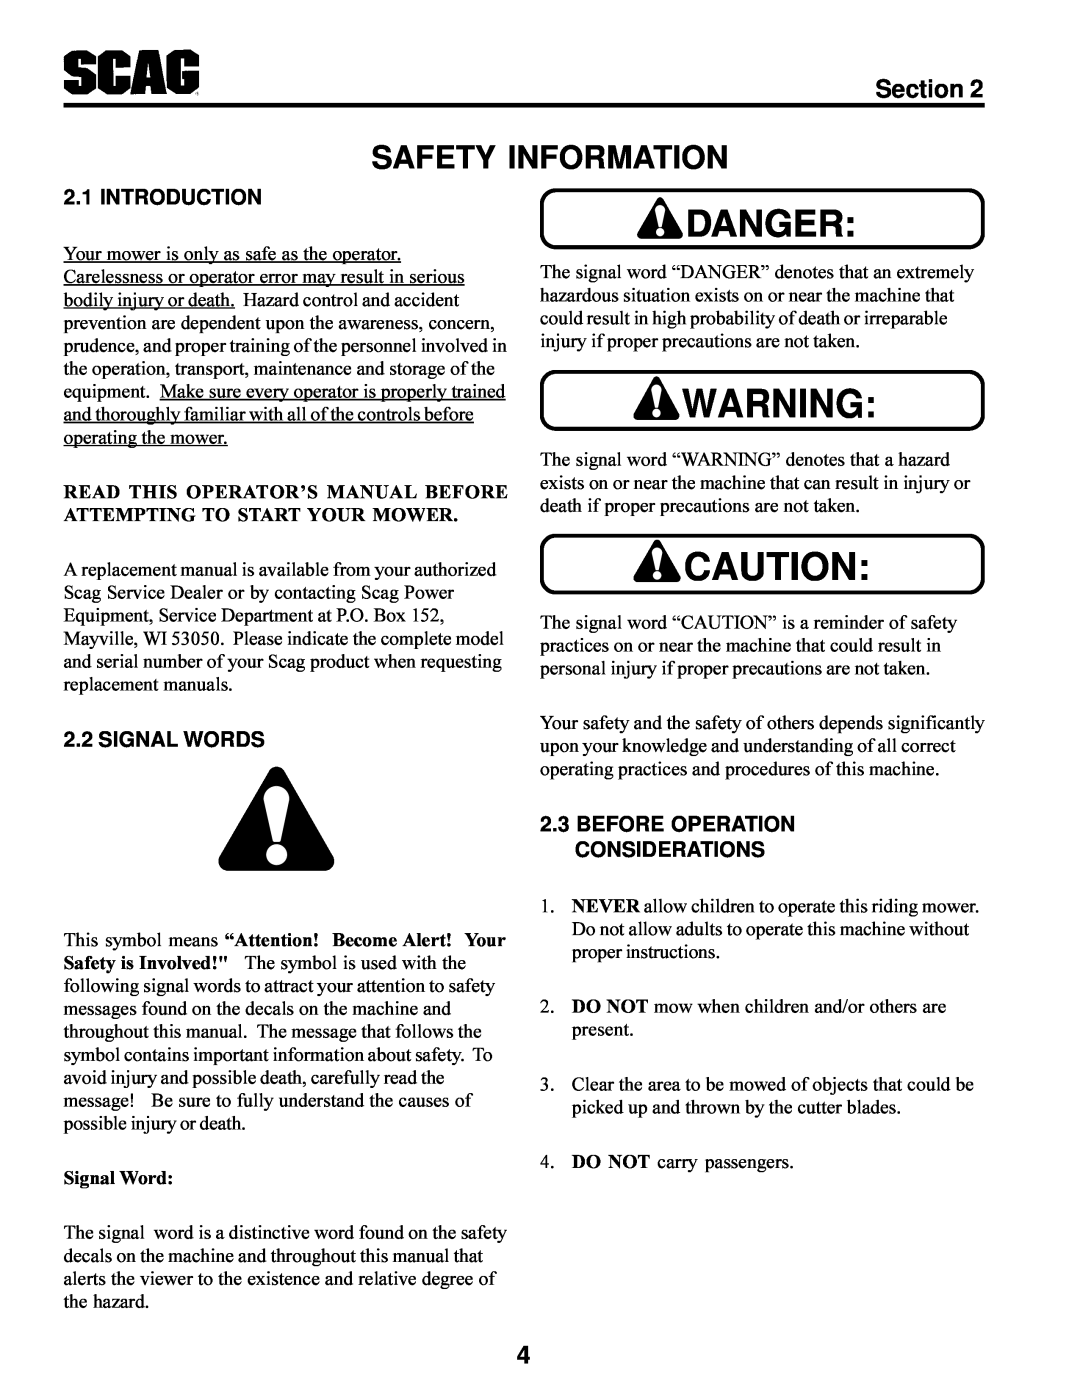 Scag Power Equipment STT-31BSG Safety Information, Introduction, Signal Words, Before Operation Considerations, Section 